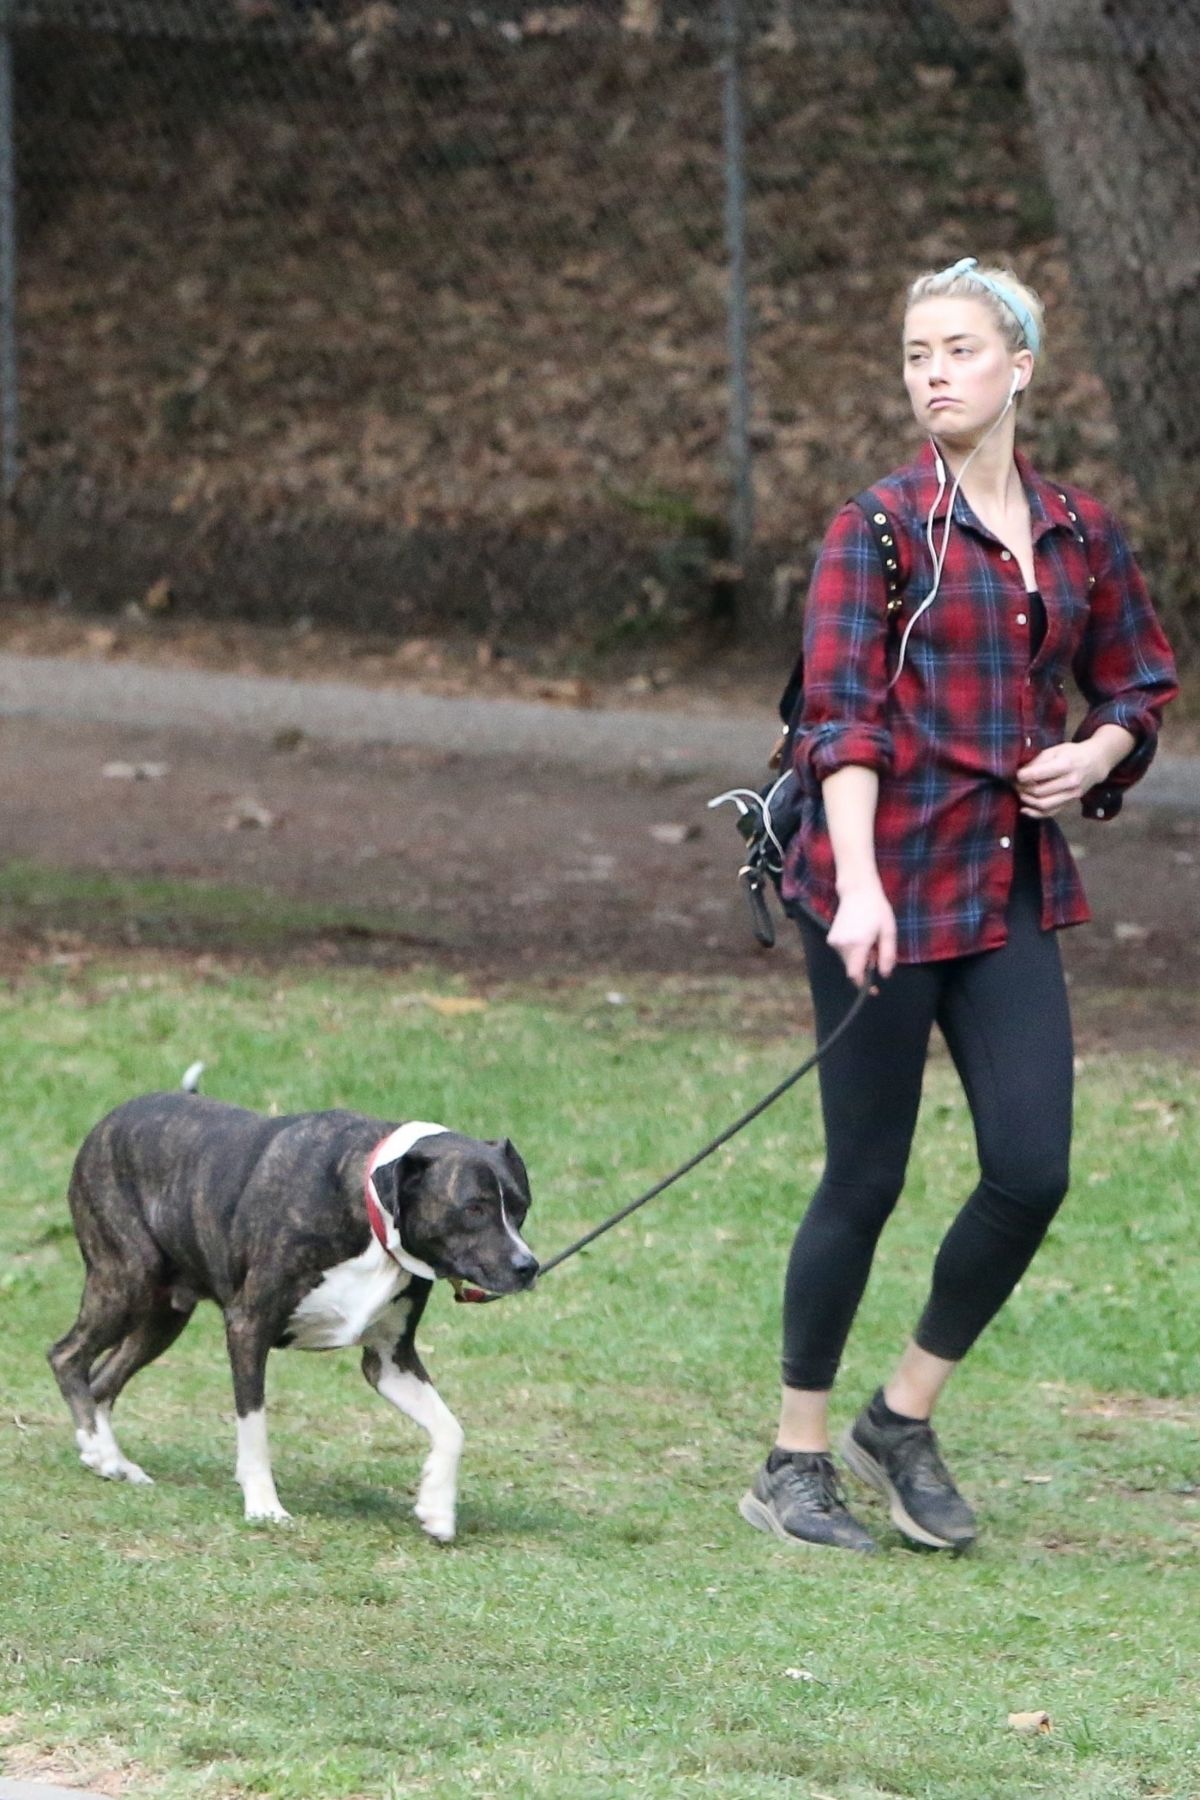 Amber Heard walks with her dog out in Los Feliz 2020/10/25 6